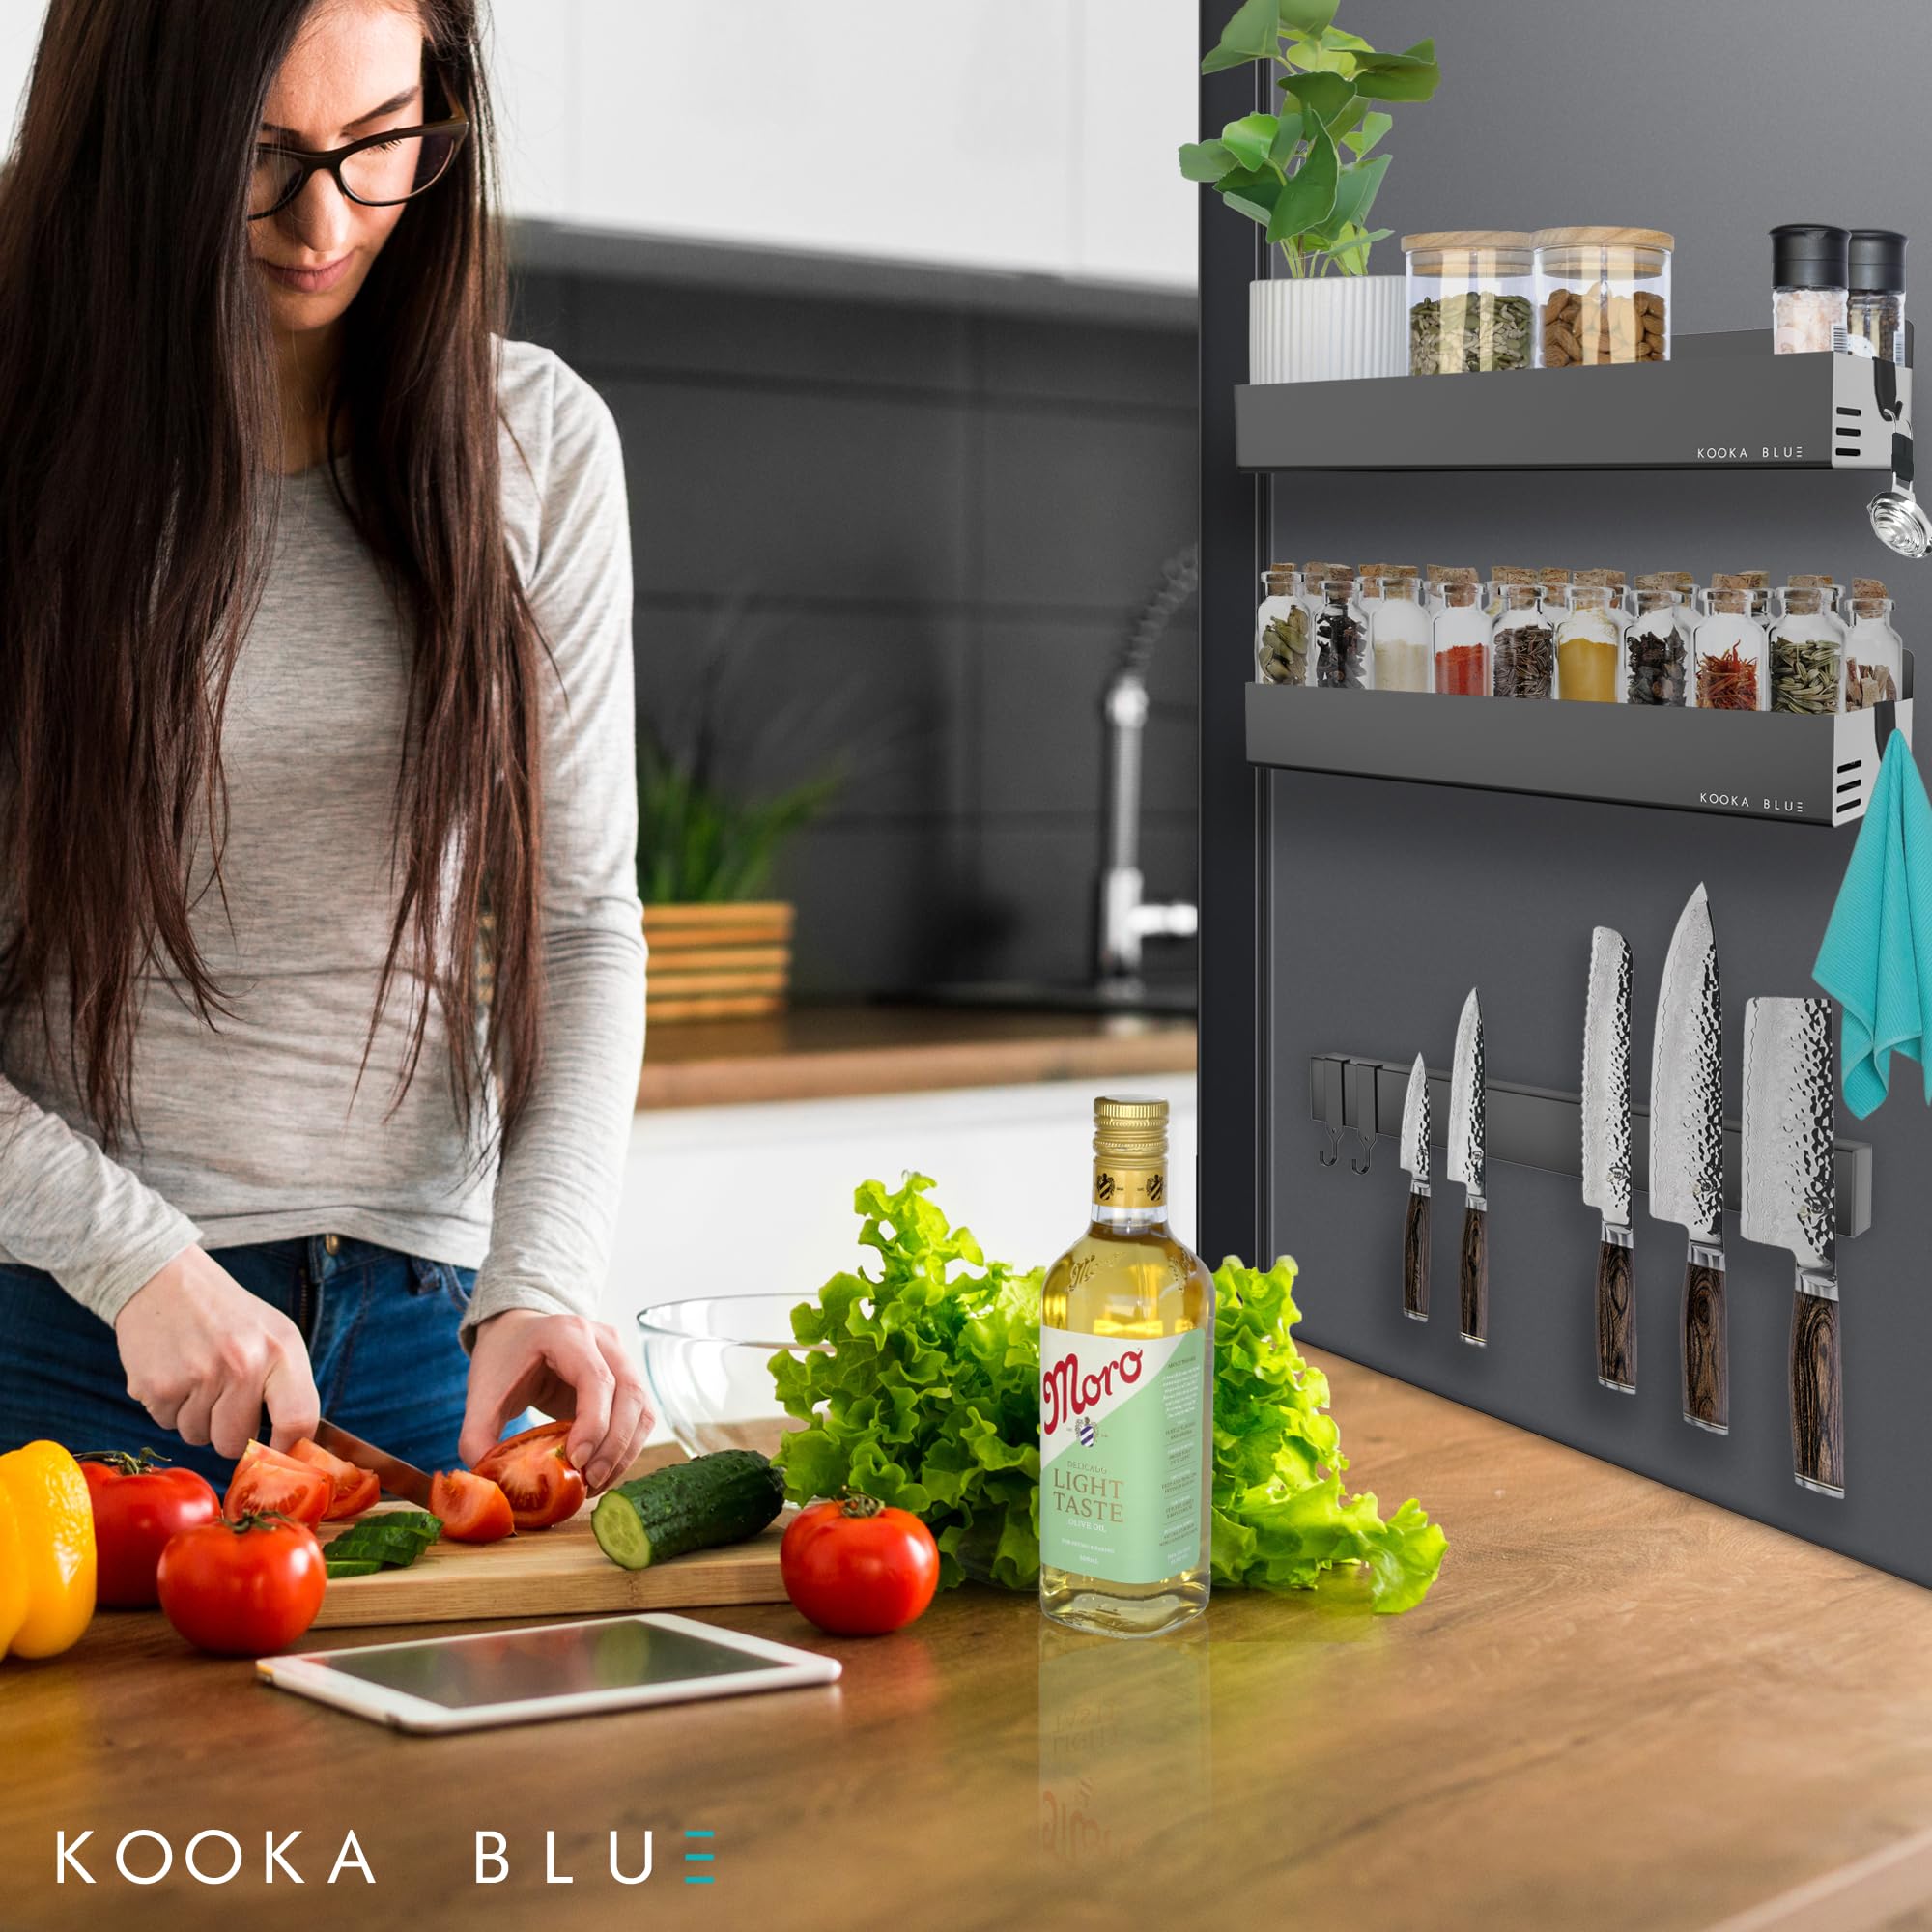 Knife Magnetic Strip For Fridge or Wall Plus 2 x Extra Large Magnetic Refrigerator Shelf. Commercial Strength Magnetic Knife Holder and Magnetic Kitchen Shelf. Magnetic Knife Strip and Shelves